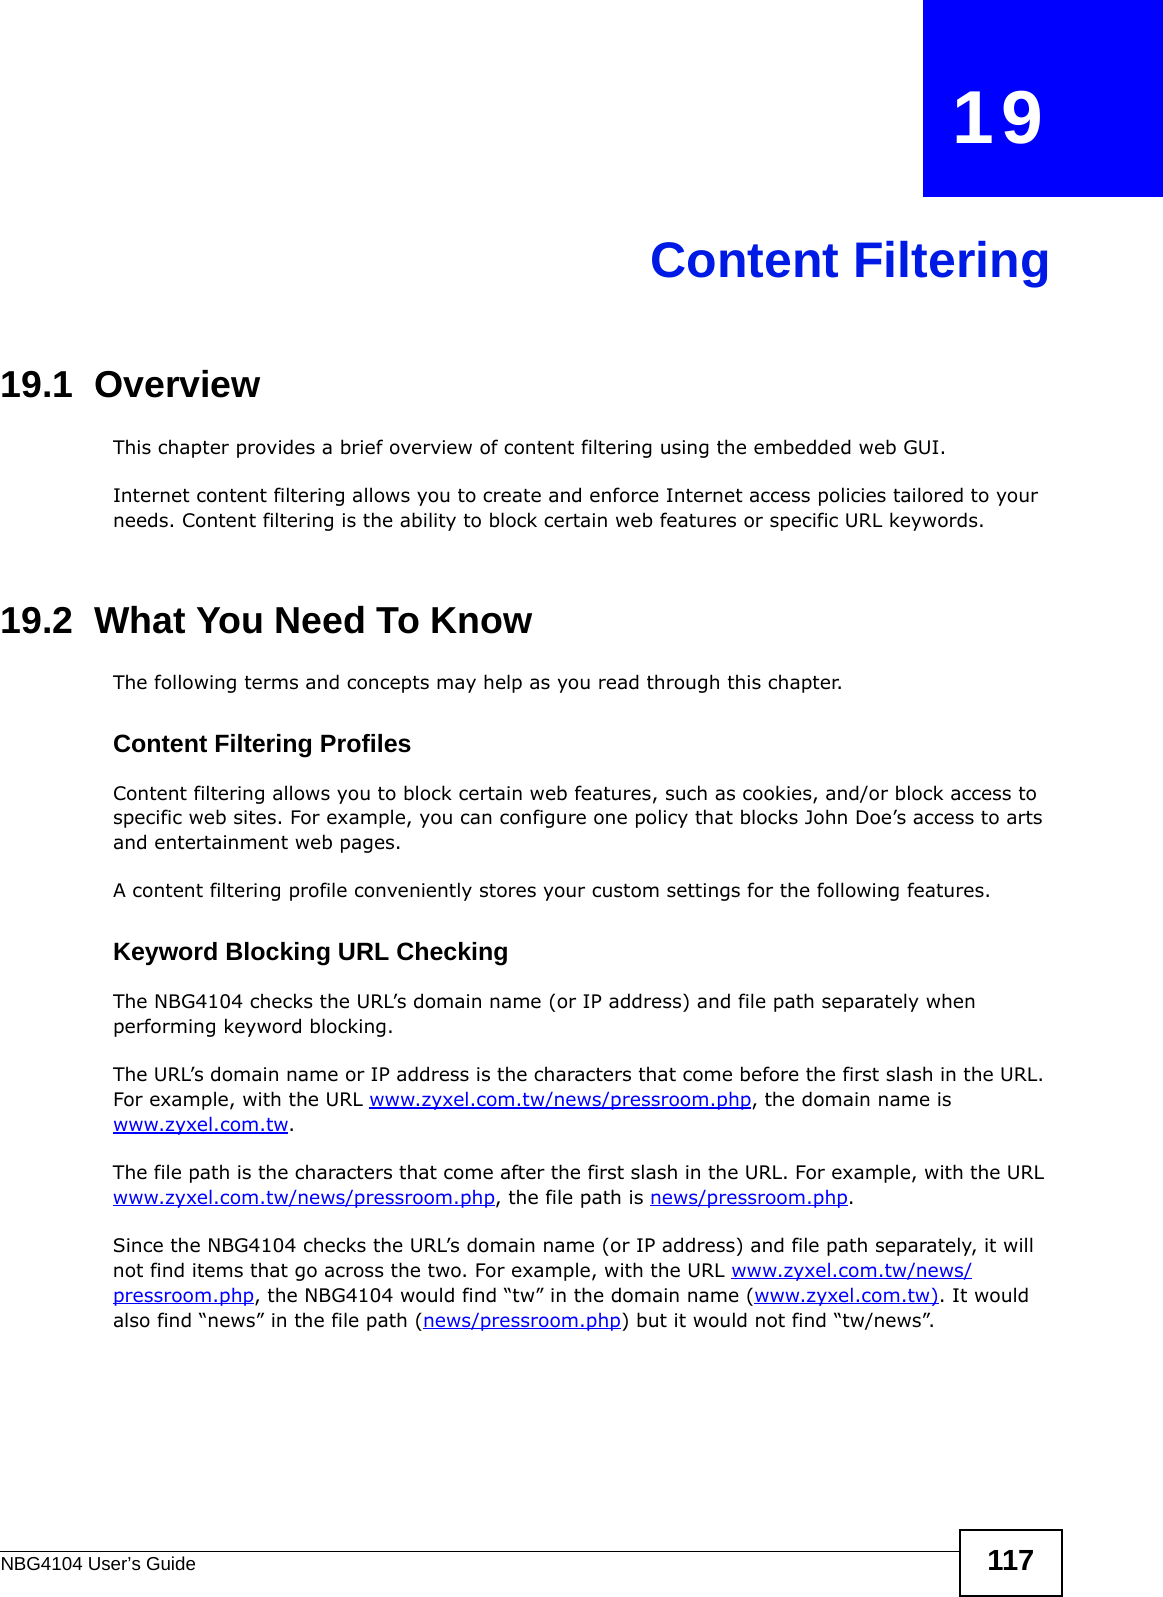 NBG4104 User’s Guide 117CHAPTER   19Content Filtering19.1  OverviewThis chapter provides a brief overview of content filtering using the embedded web GUI.Internet content filtering allows you to create and enforce Internet access policies tailored to your needs. Content filtering is the ability to block certain web features or specific URL keywords.19.2  What You Need To KnowThe following terms and concepts may help as you read through this chapter.Content Filtering ProfilesContent filtering allows you to block certain web features, such as cookies, and/or block access to specific web sites. For example, you can configure one policy that blocks John Doe’s access to arts and entertainment web pages.A content filtering profile conveniently stores your custom settings for the following features.Keyword Blocking URL CheckingThe NBG4104 checks the URL’s domain name (or IP address) and file path separately when performing keyword blocking. The URL’s domain name or IP address is the characters that come before the first slash in the URL. For example, with the URL www.zyxel.com.tw/news/pressroom.php, the domain name is www.zyxel.com.tw.The file path is the characters that come after the first slash in the URL. For example, with the URL www.zyxel.com.tw/news/pressroom.php, the file path is news/pressroom.php.Since the NBG4104 checks the URL’s domain name (or IP address) and file path separately, it will not find items that go across the two. For example, with the URL www.zyxel.com.tw/news/pressroom.php, the NBG4104 would find “tw” in the domain name (www.zyxel.com.tw). It would also find “news” in the file path (news/pressroom.php) but it would not find “tw/news”.